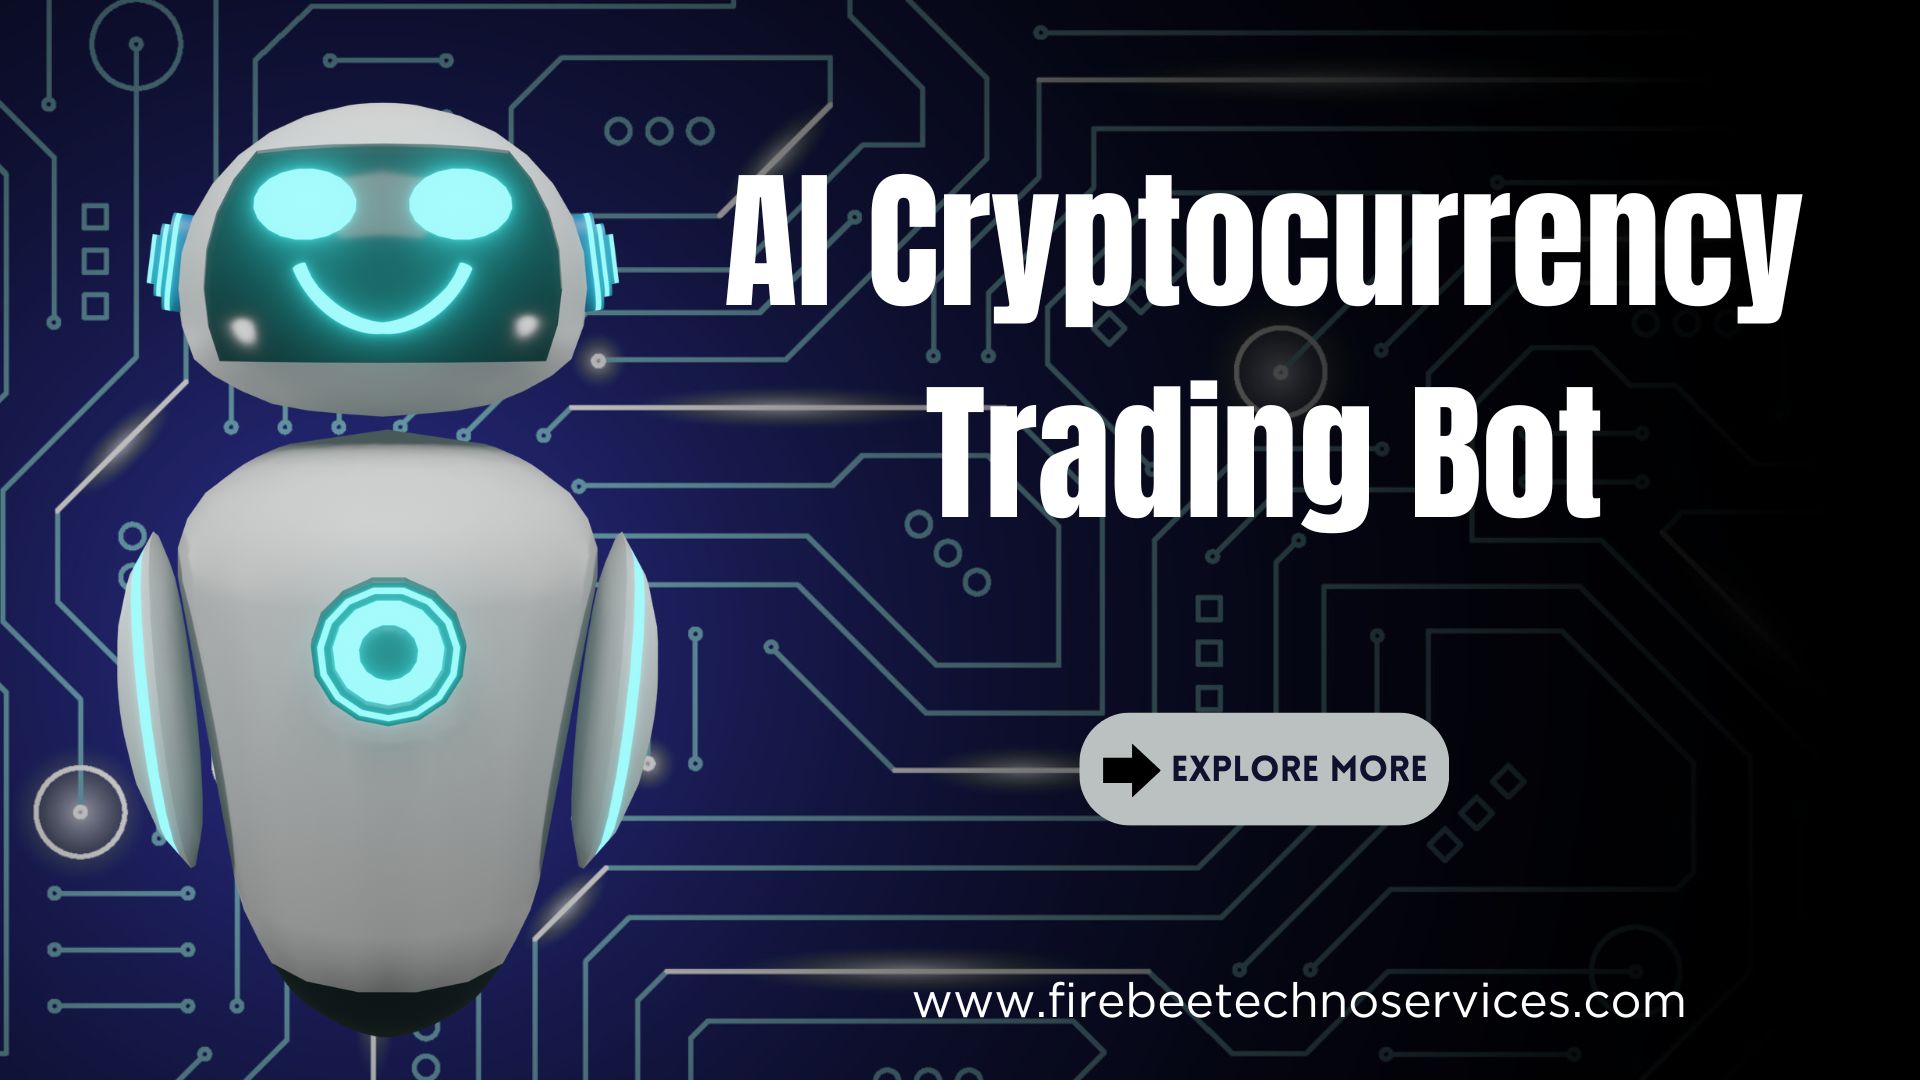 A top company advancing AI cryptocurrency trading bots development.